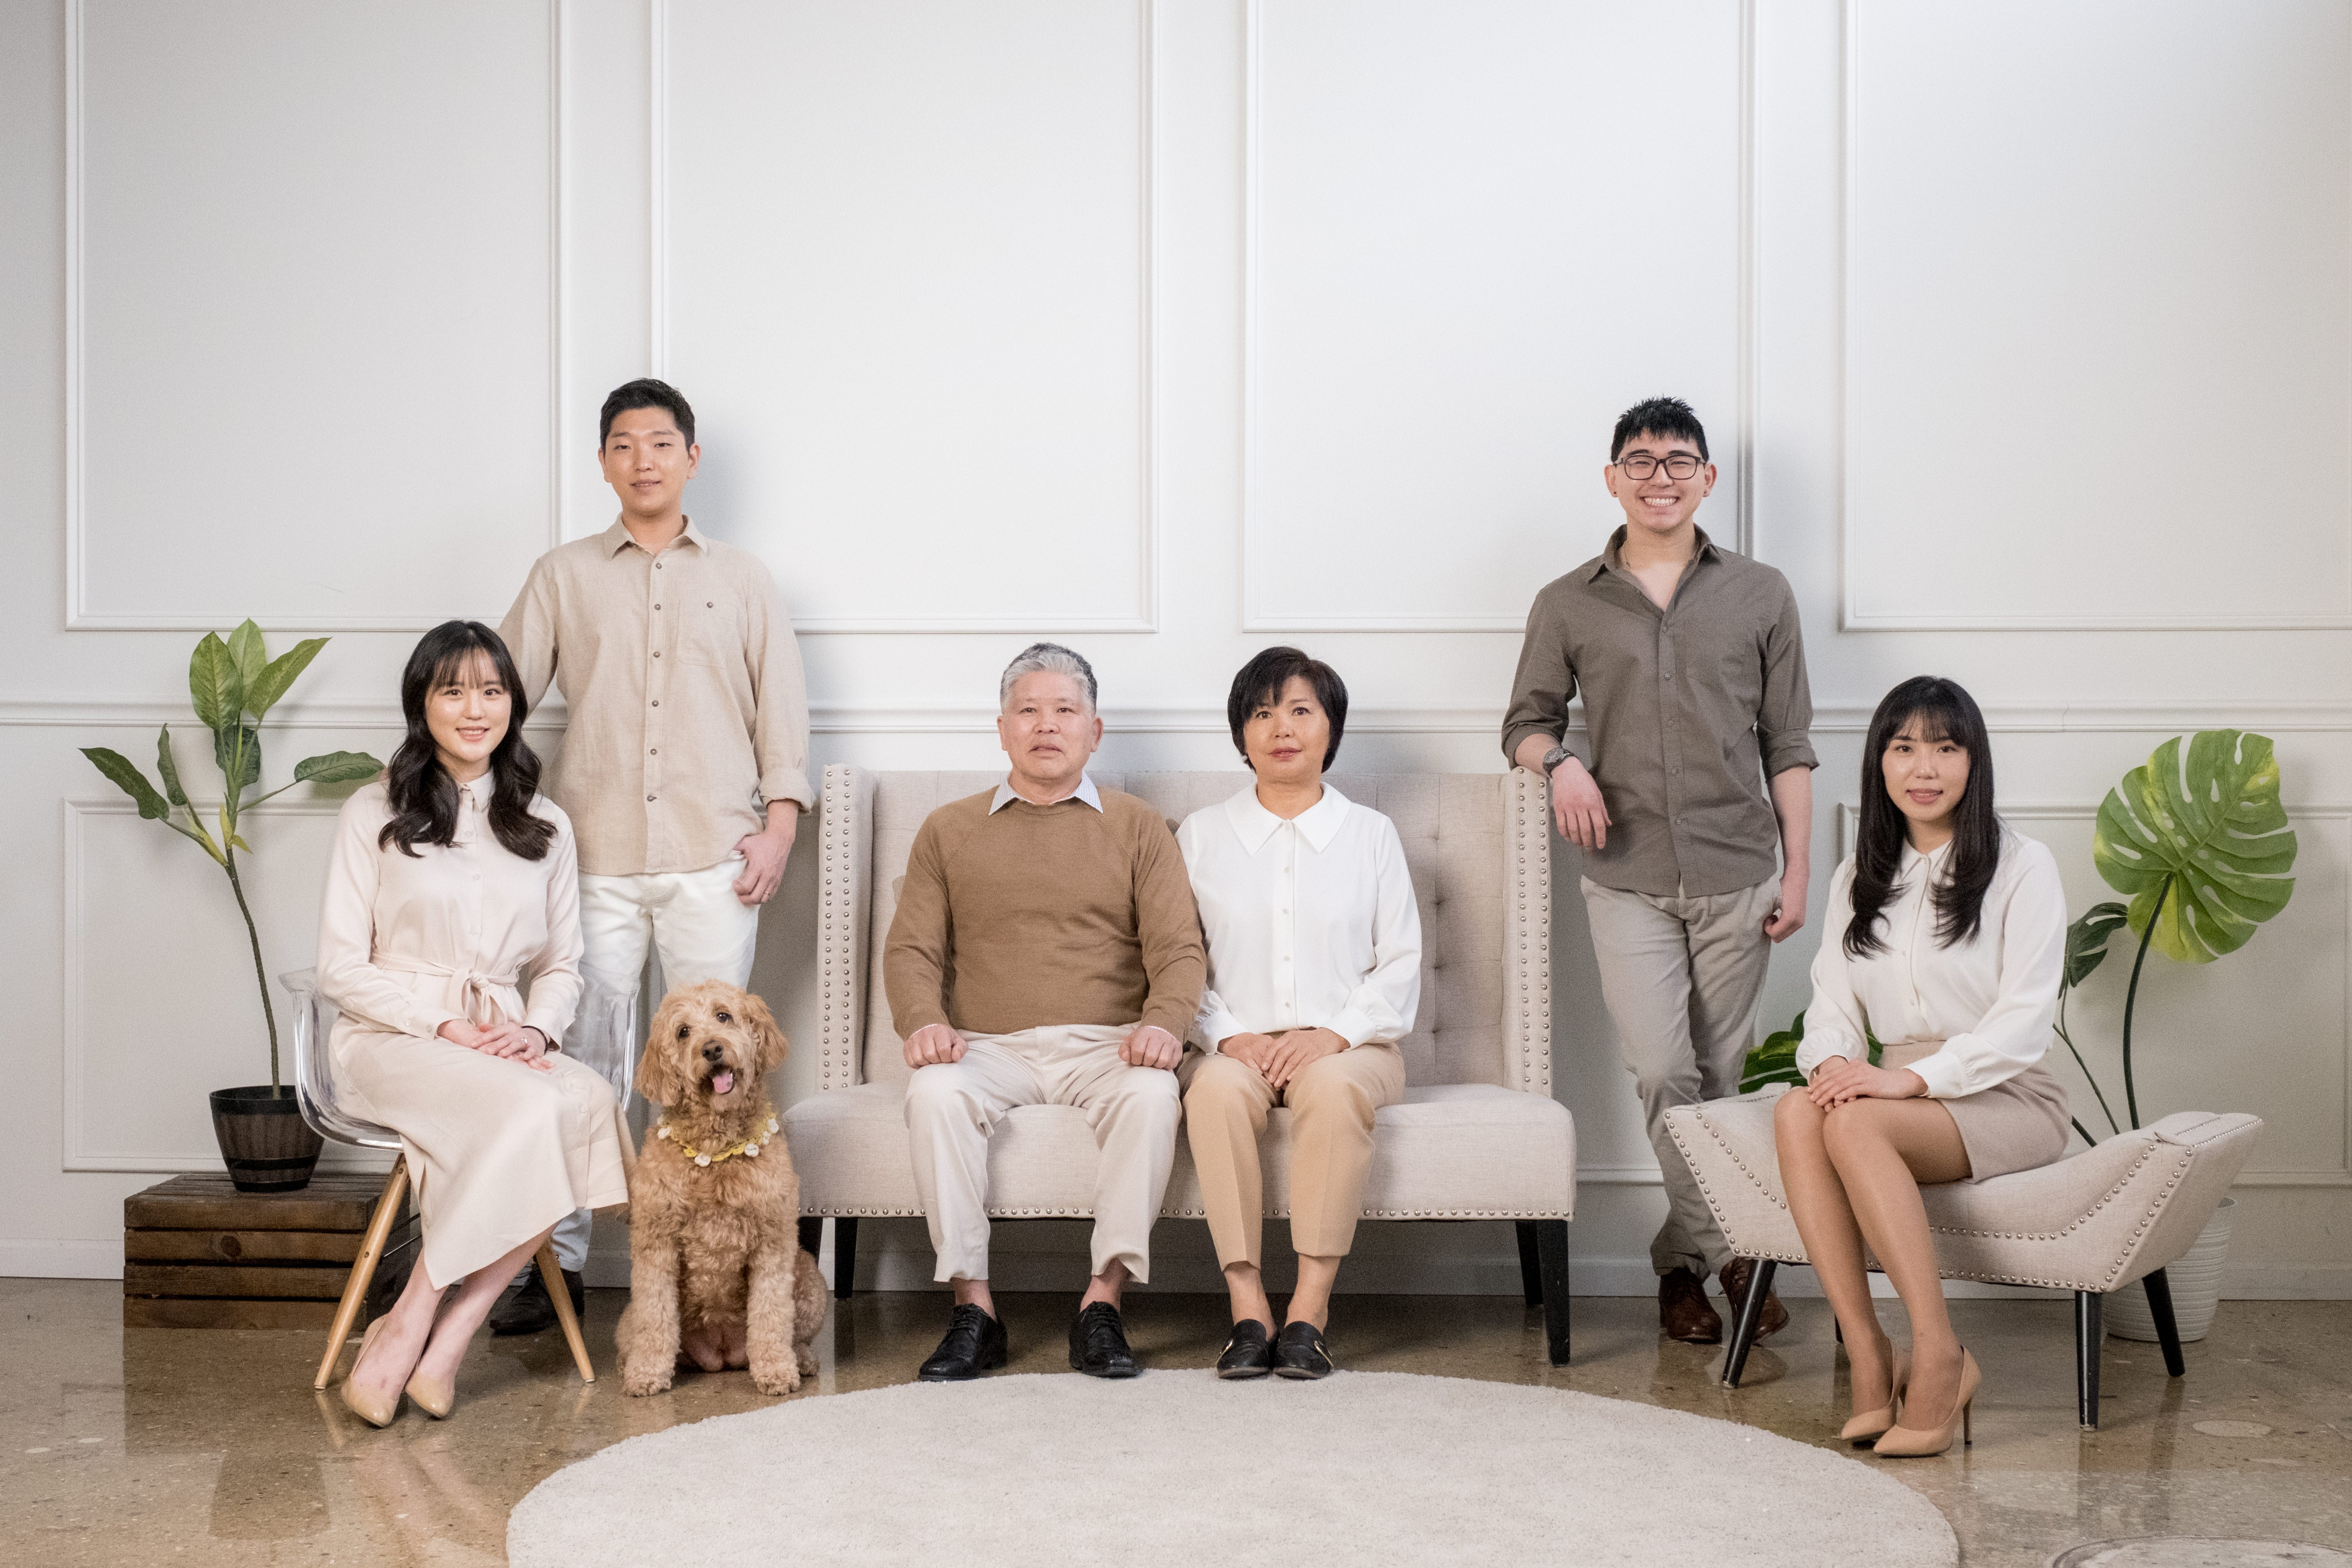 Choi Family Photo session at Chicago Baby photo studio, Brown aesthetic and minimalist design theme